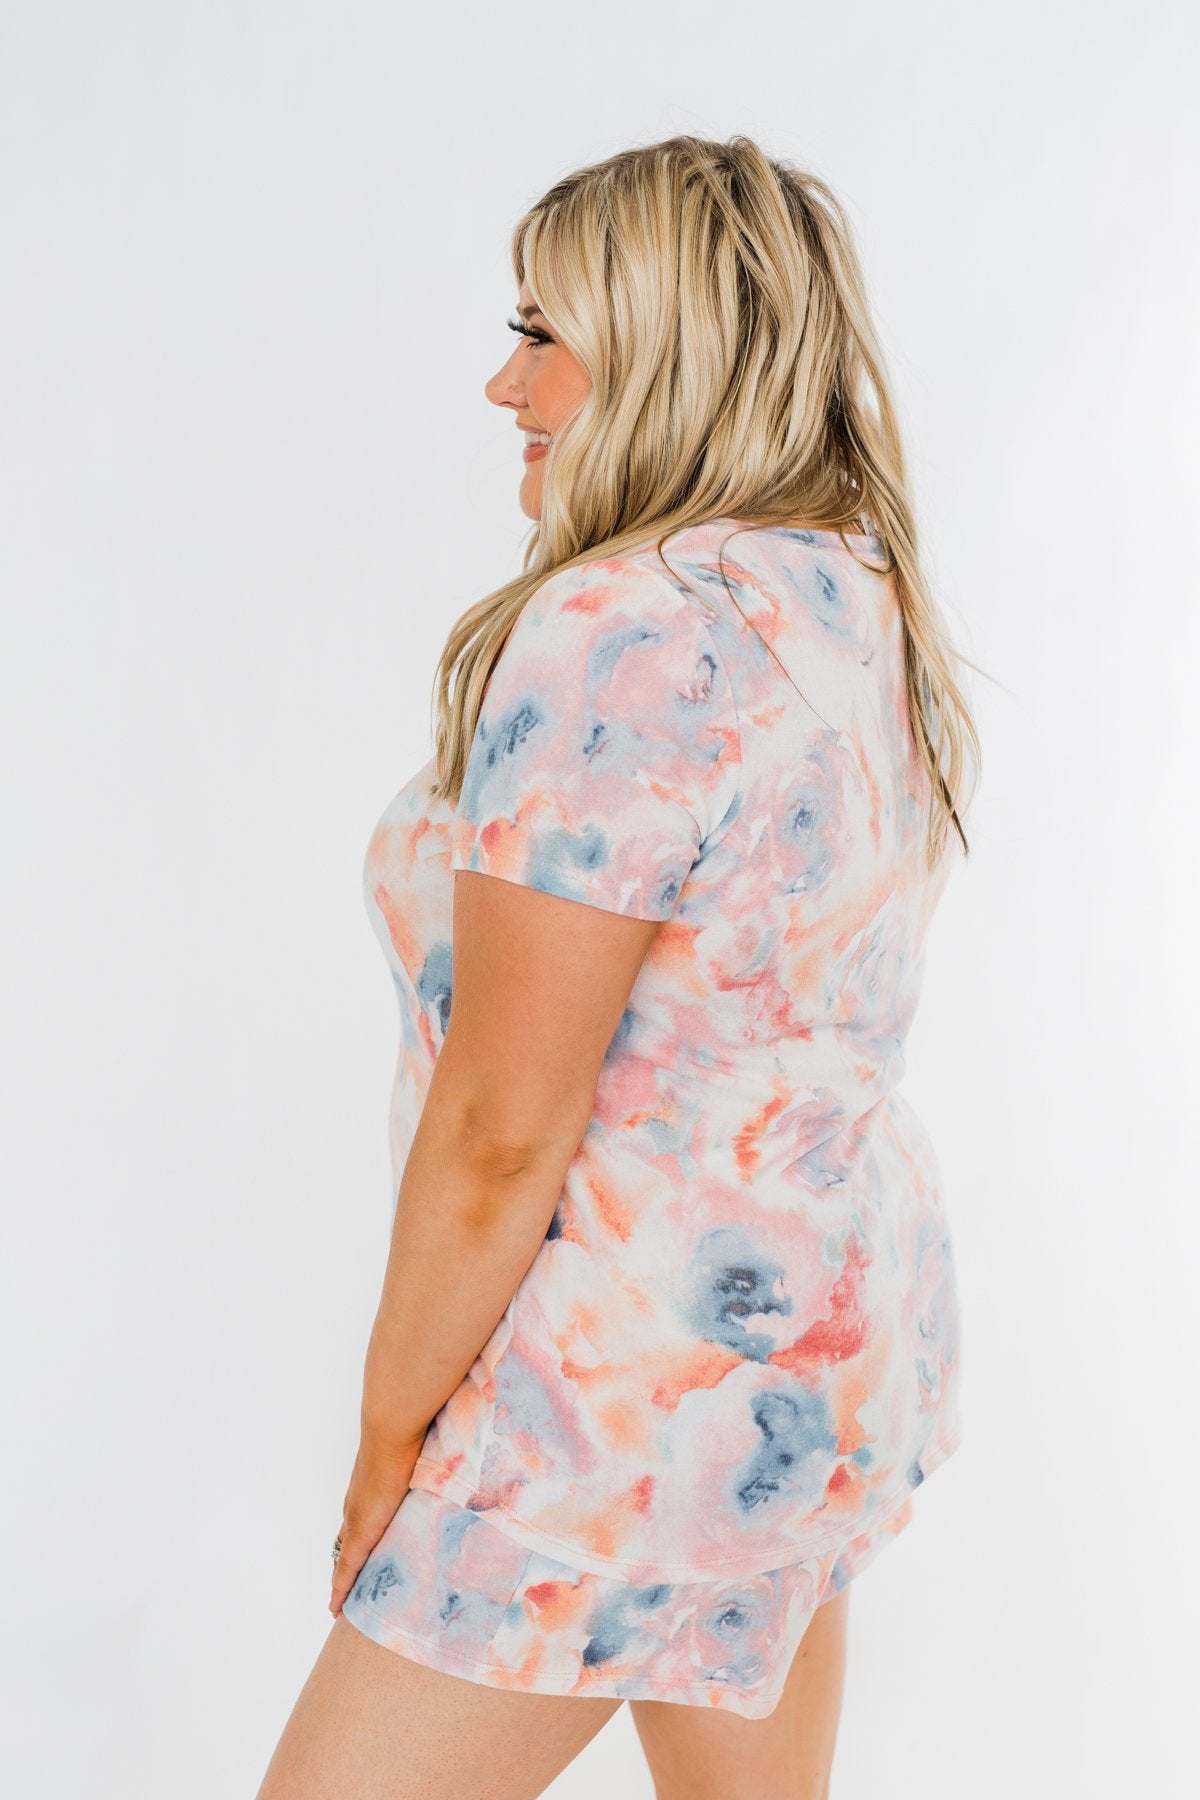 Move To The Music Floral Watercolor Top- Pink, Peach, Blue